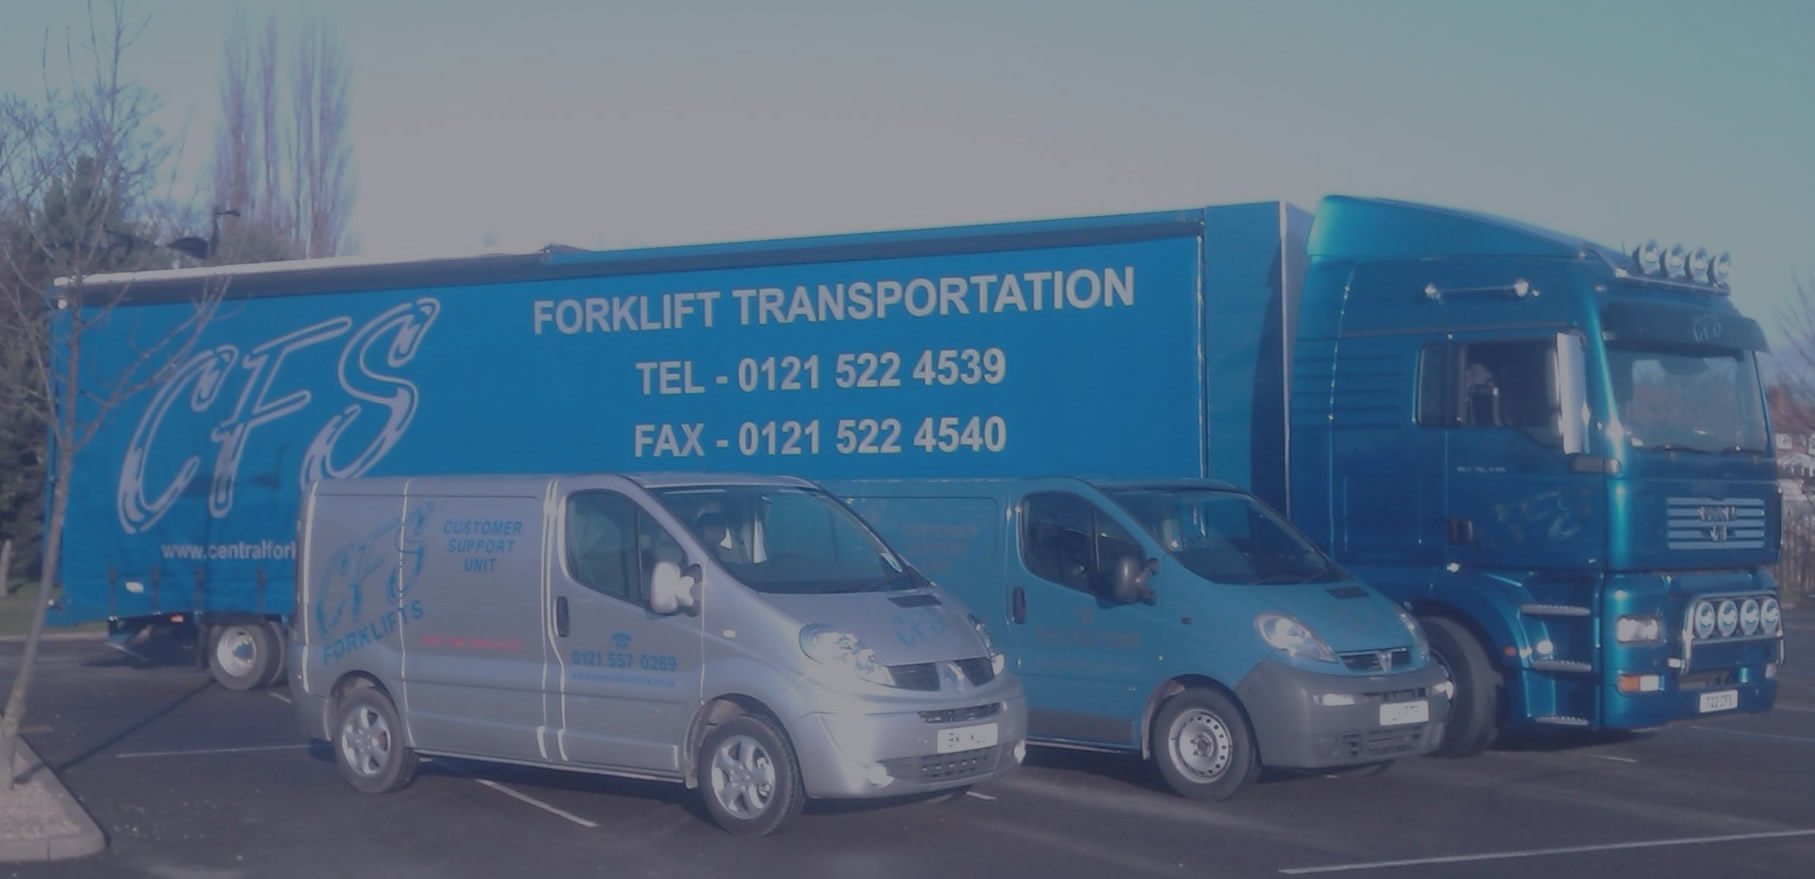 forklift-truck-hire-in-oxford